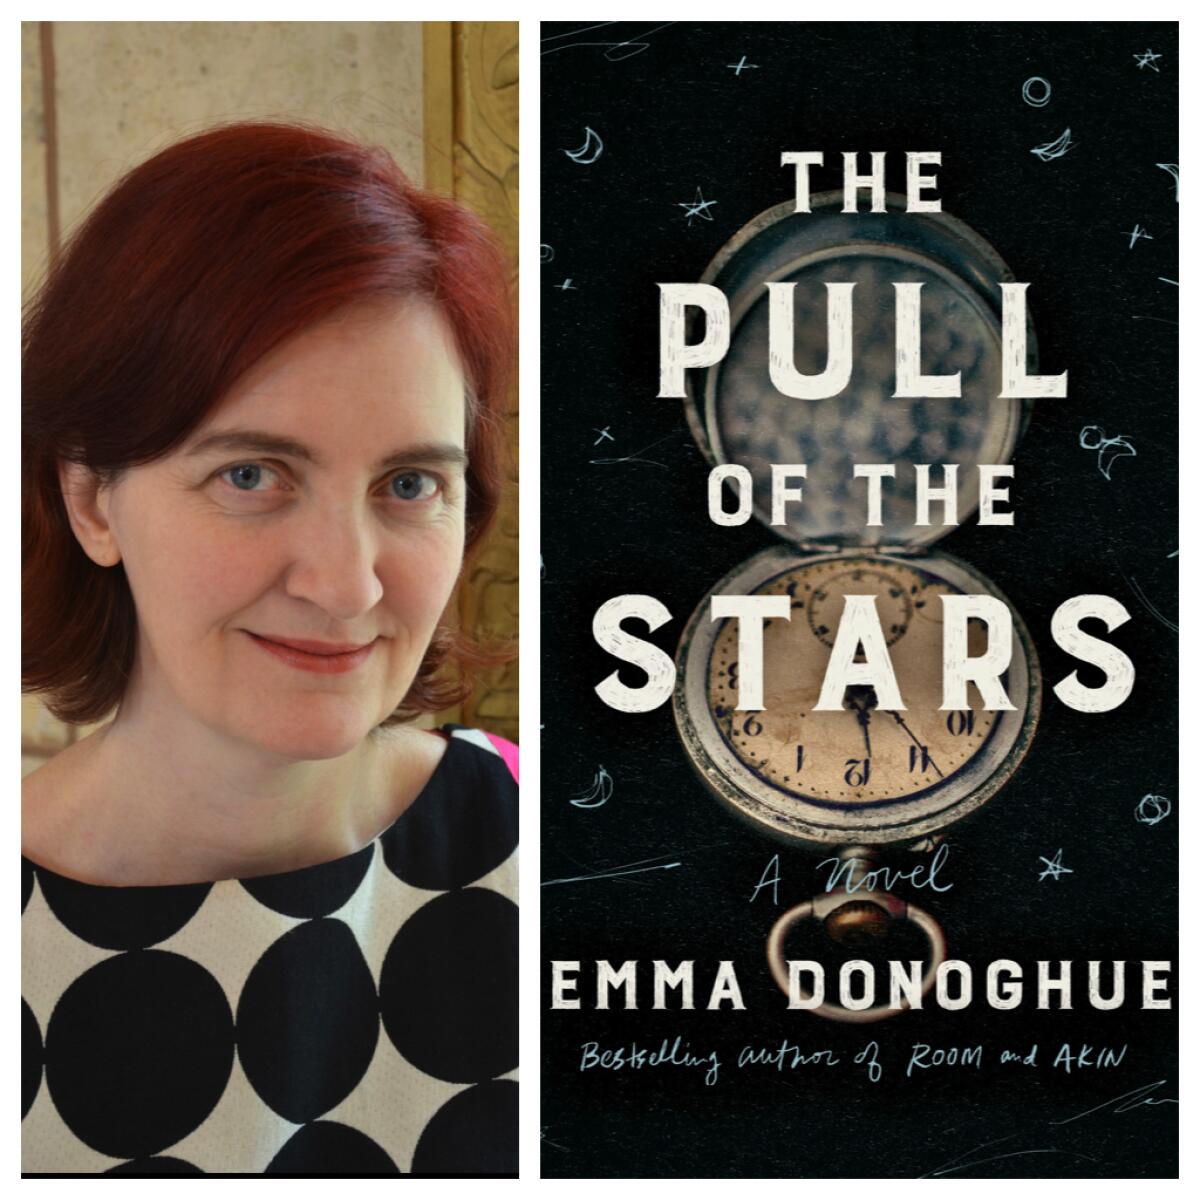 Emma Donoghue, author of “The Pull Of The Stars.”